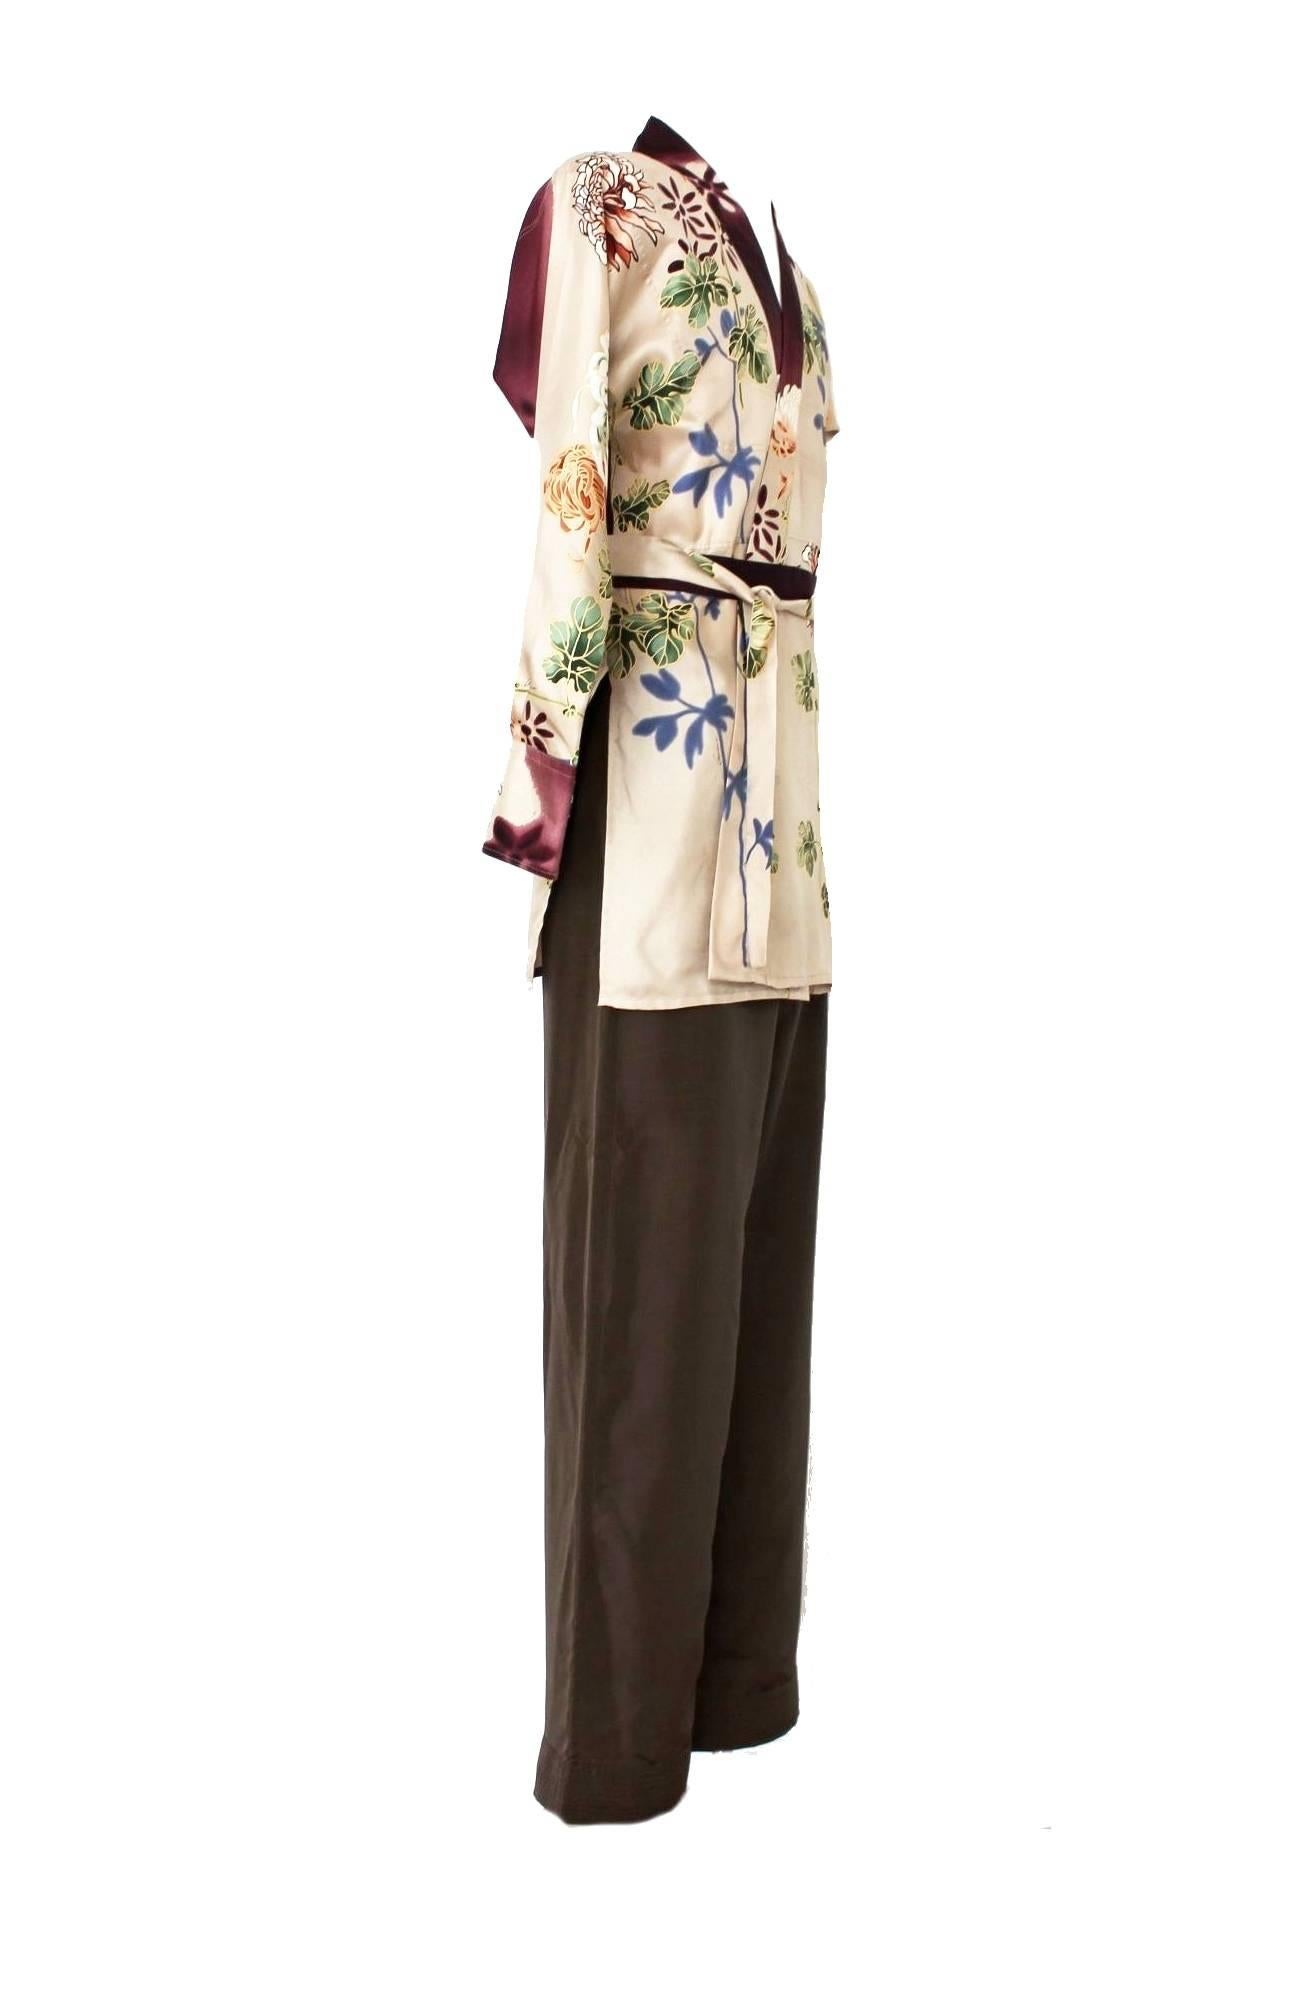 VERY RARE
TOM FORD FOR GUCCI
FLORAL KIMONO / DRESSING GOWN / ROBE AND PANTS

FROM SS 2001 COLLECTION

DETAILS:

    Unique GUCCI BY TOM FORD Kimono
    From GUCCI SS 2001 collection
    Dressing Gown / Robe with belt and matching